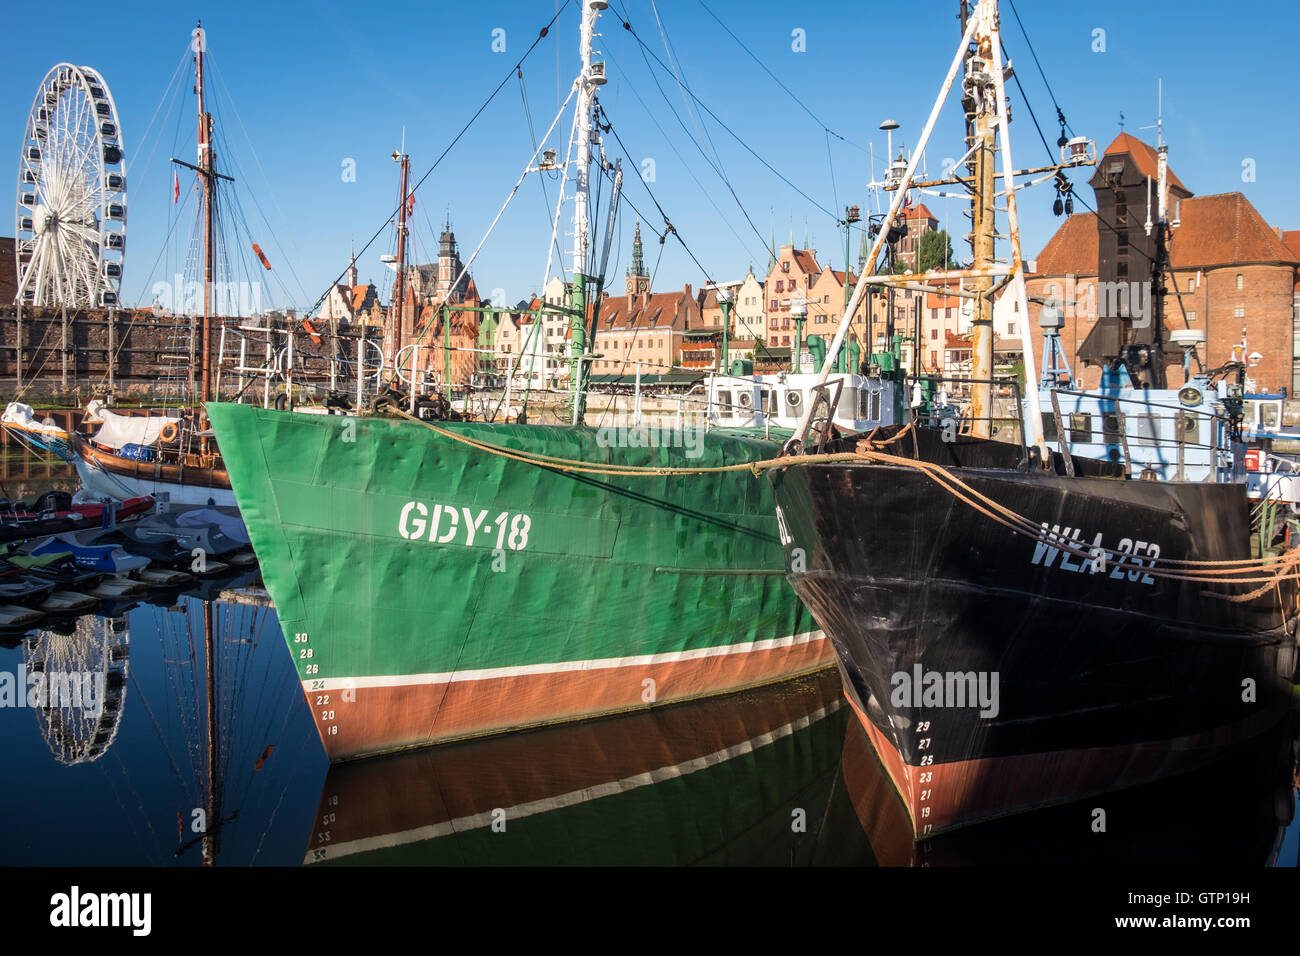 Fishing boats in the old town of Gdansk Stock Photo